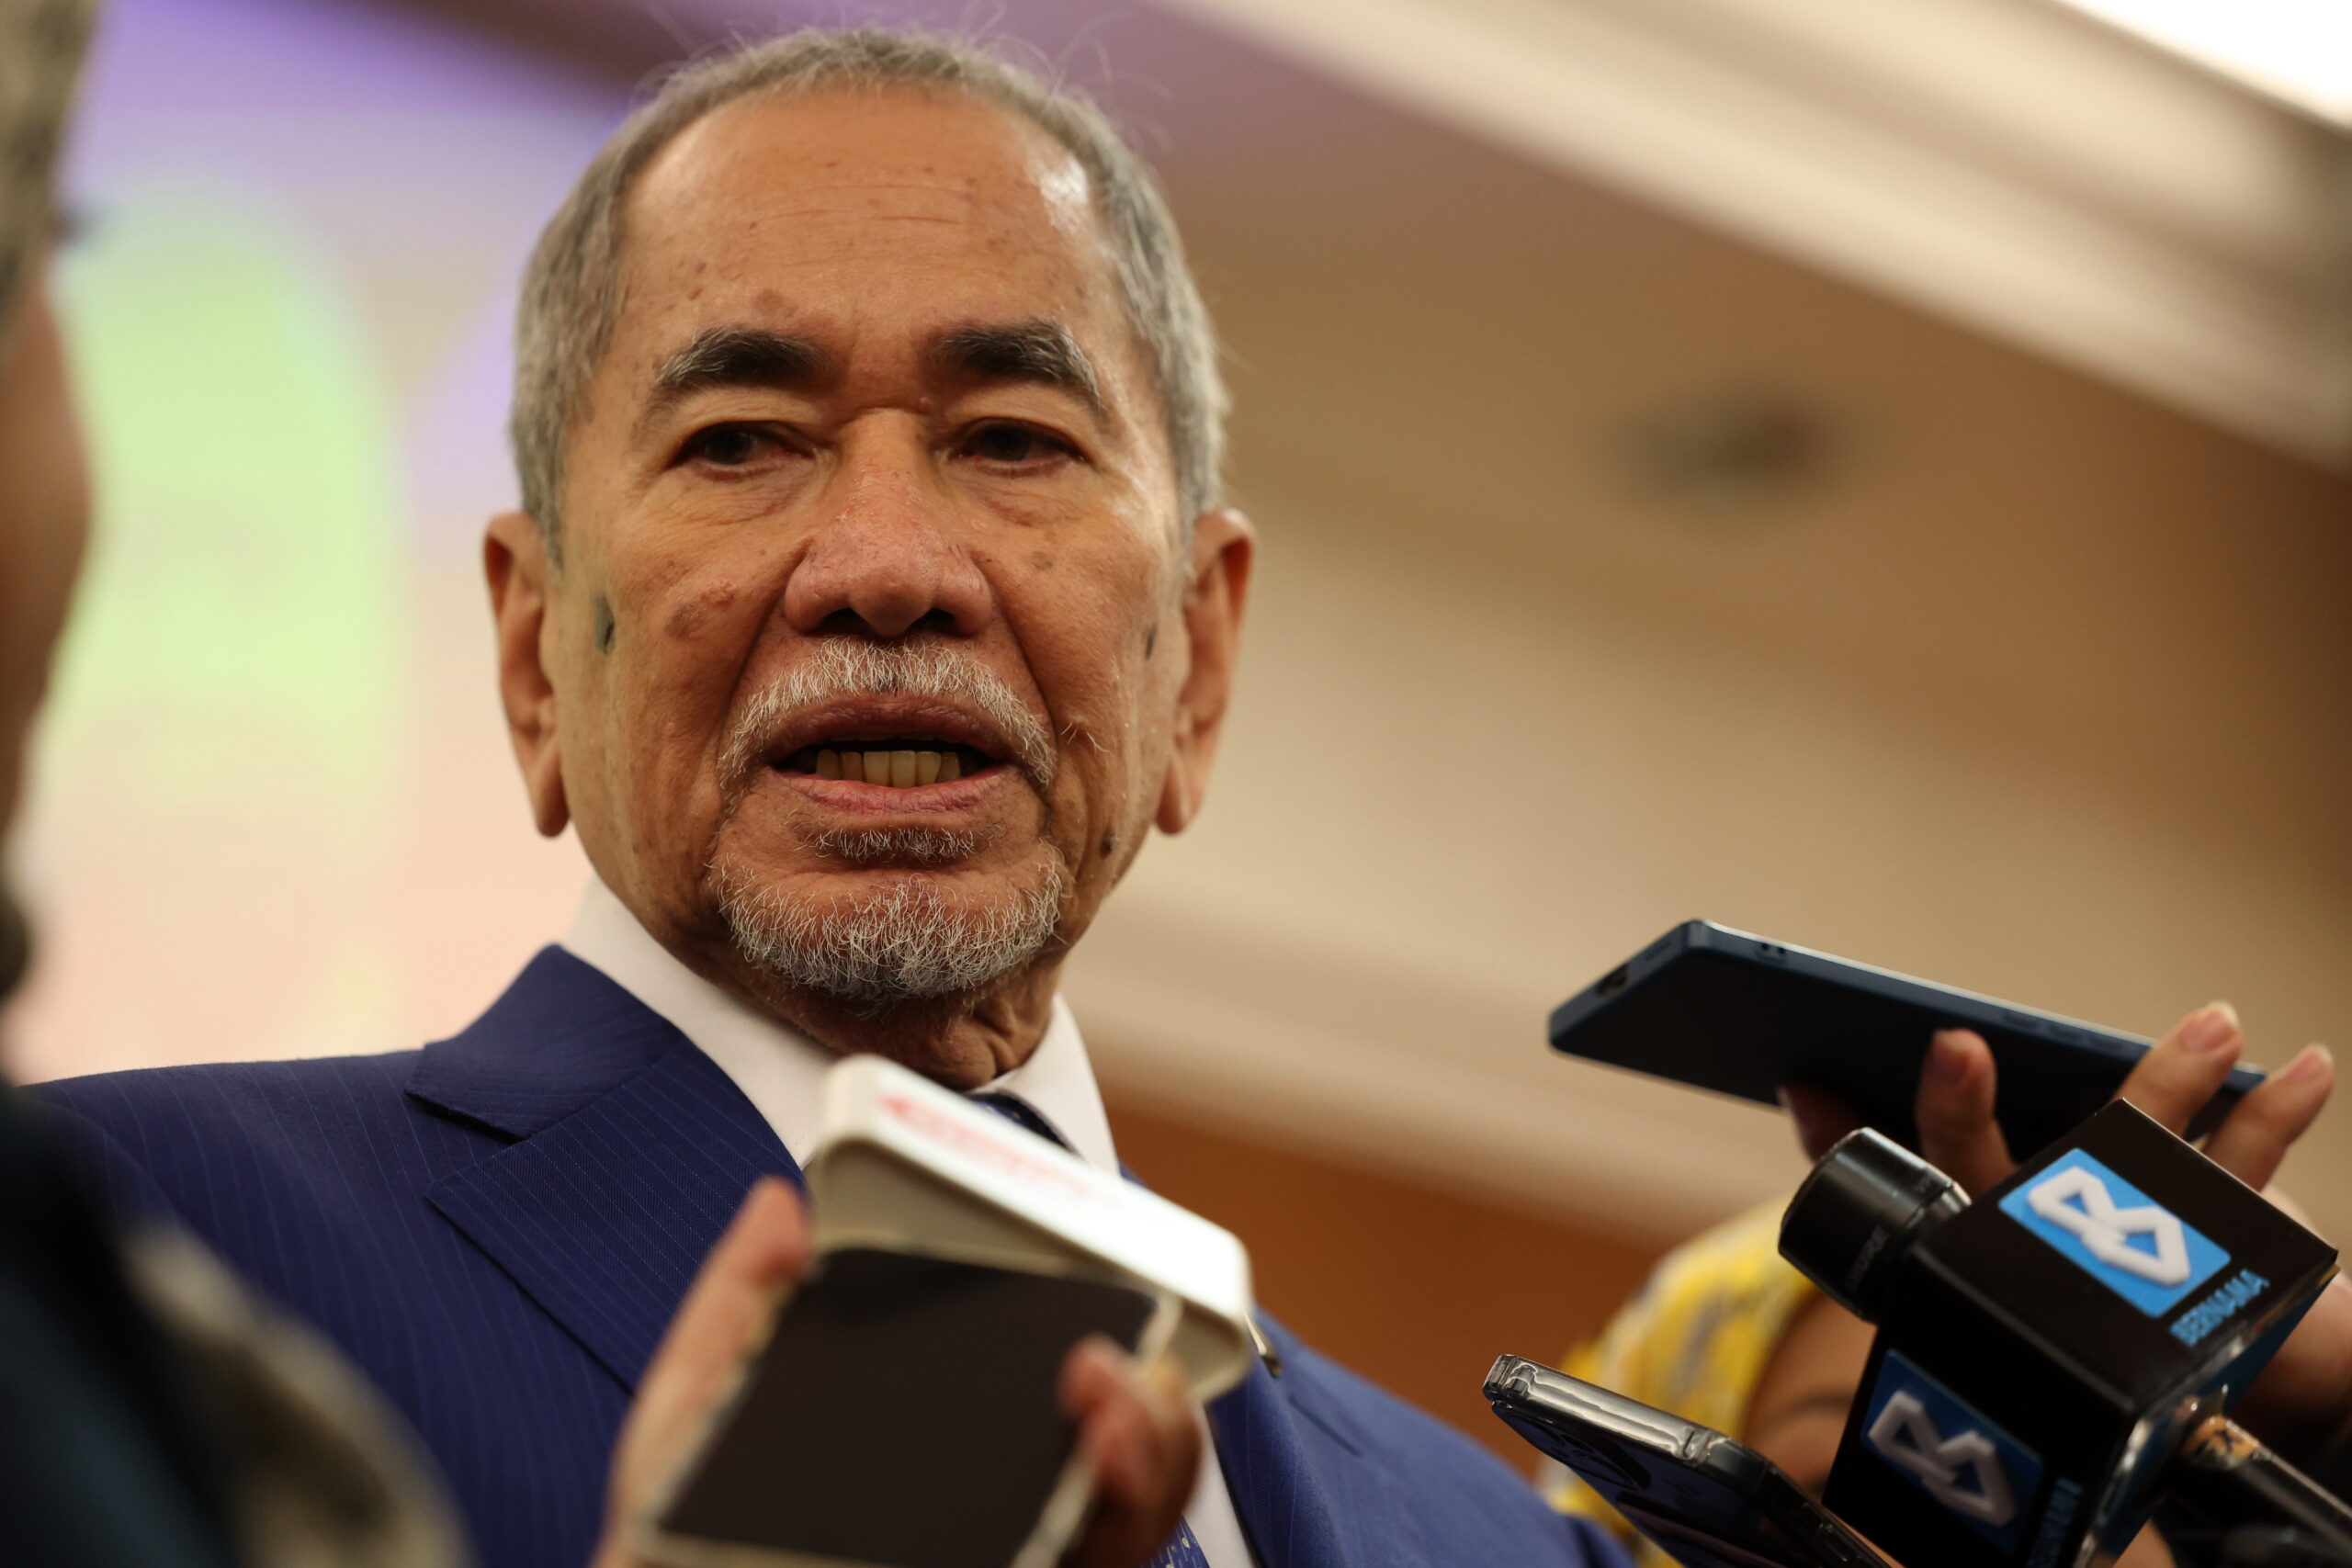 Sarawak deputy premier tight-lipped over Wan Junaidi’s appointment as governor